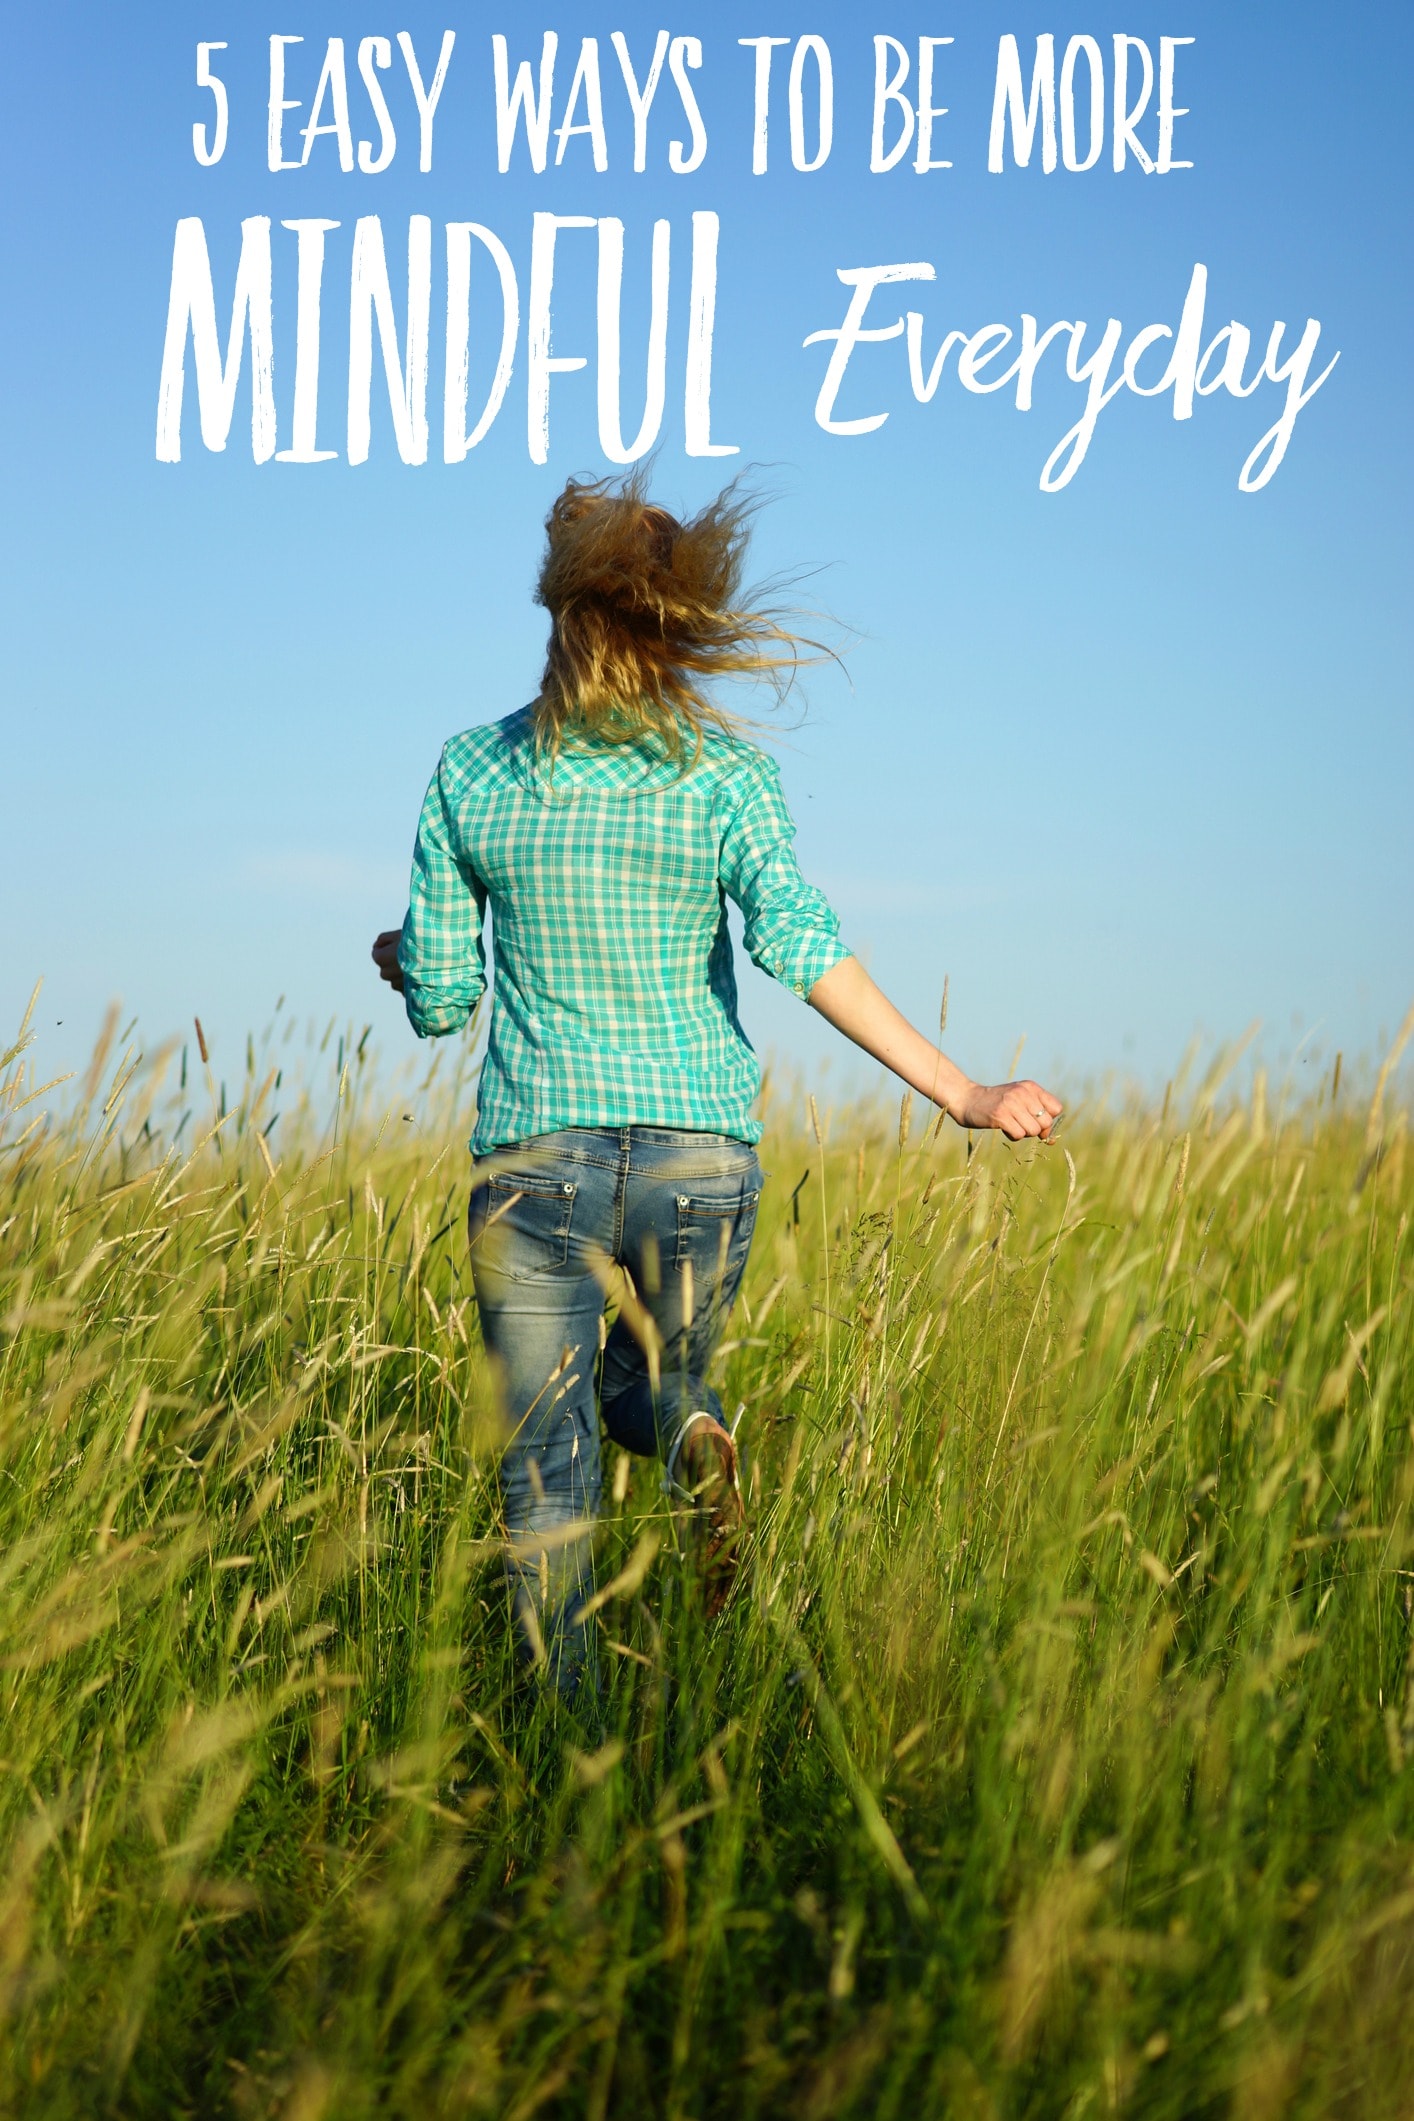 Find out how to be more mindful in your everyday life. People who are mindful are happier, more productive, and experience less stress. Learn easy ways to practice mindfulness.